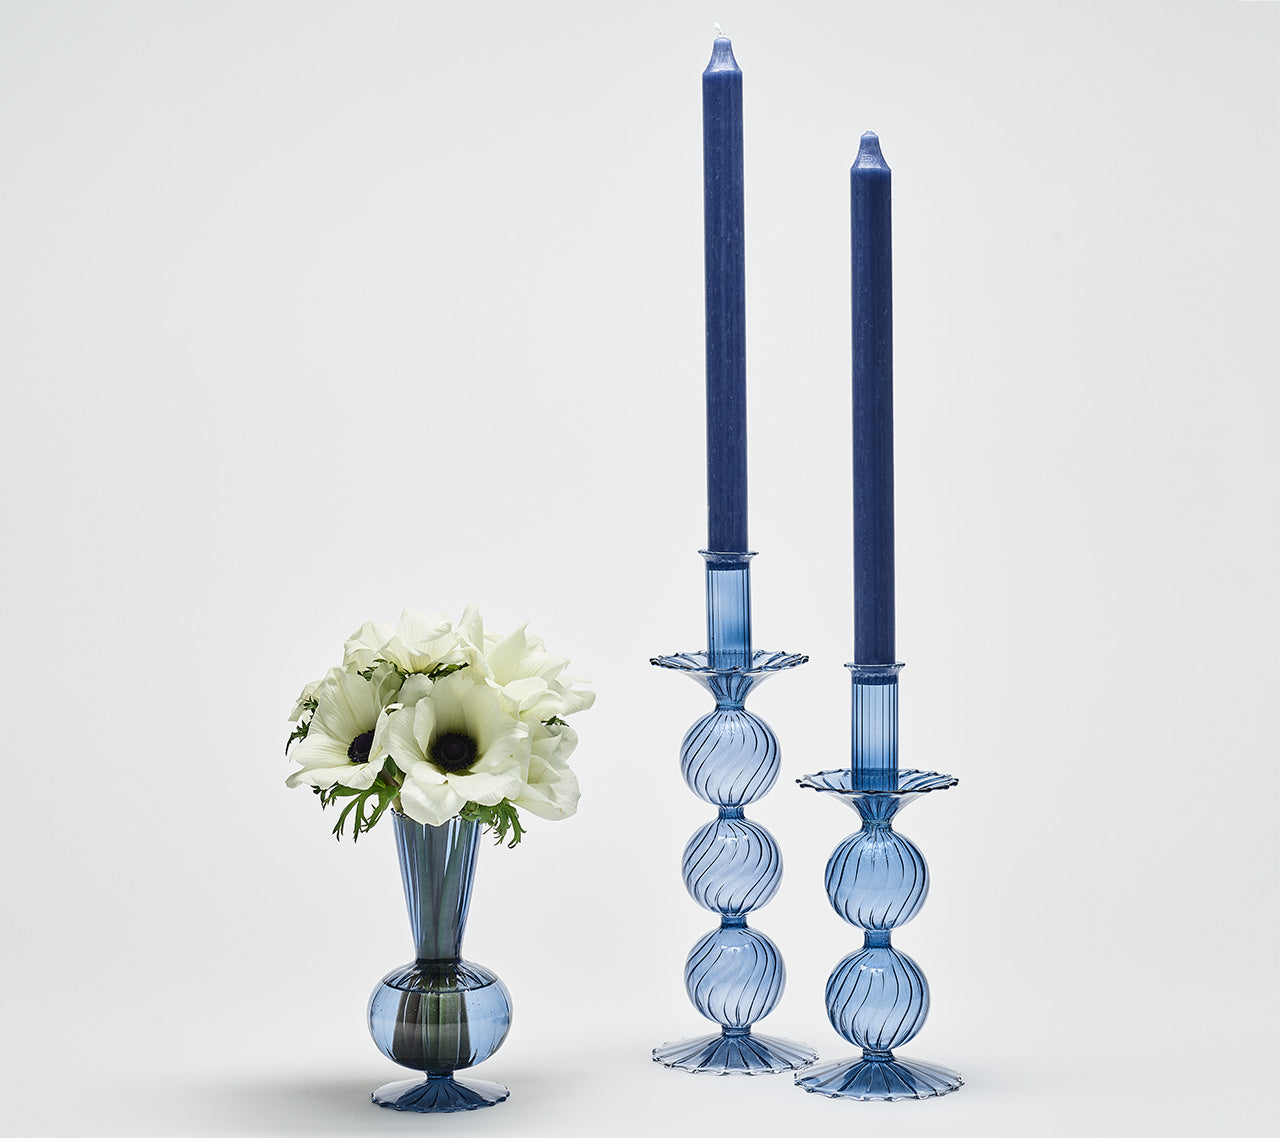 Two Bella Candleholders in blue next to a Tess Bud Vase in cadet blue with white flowers